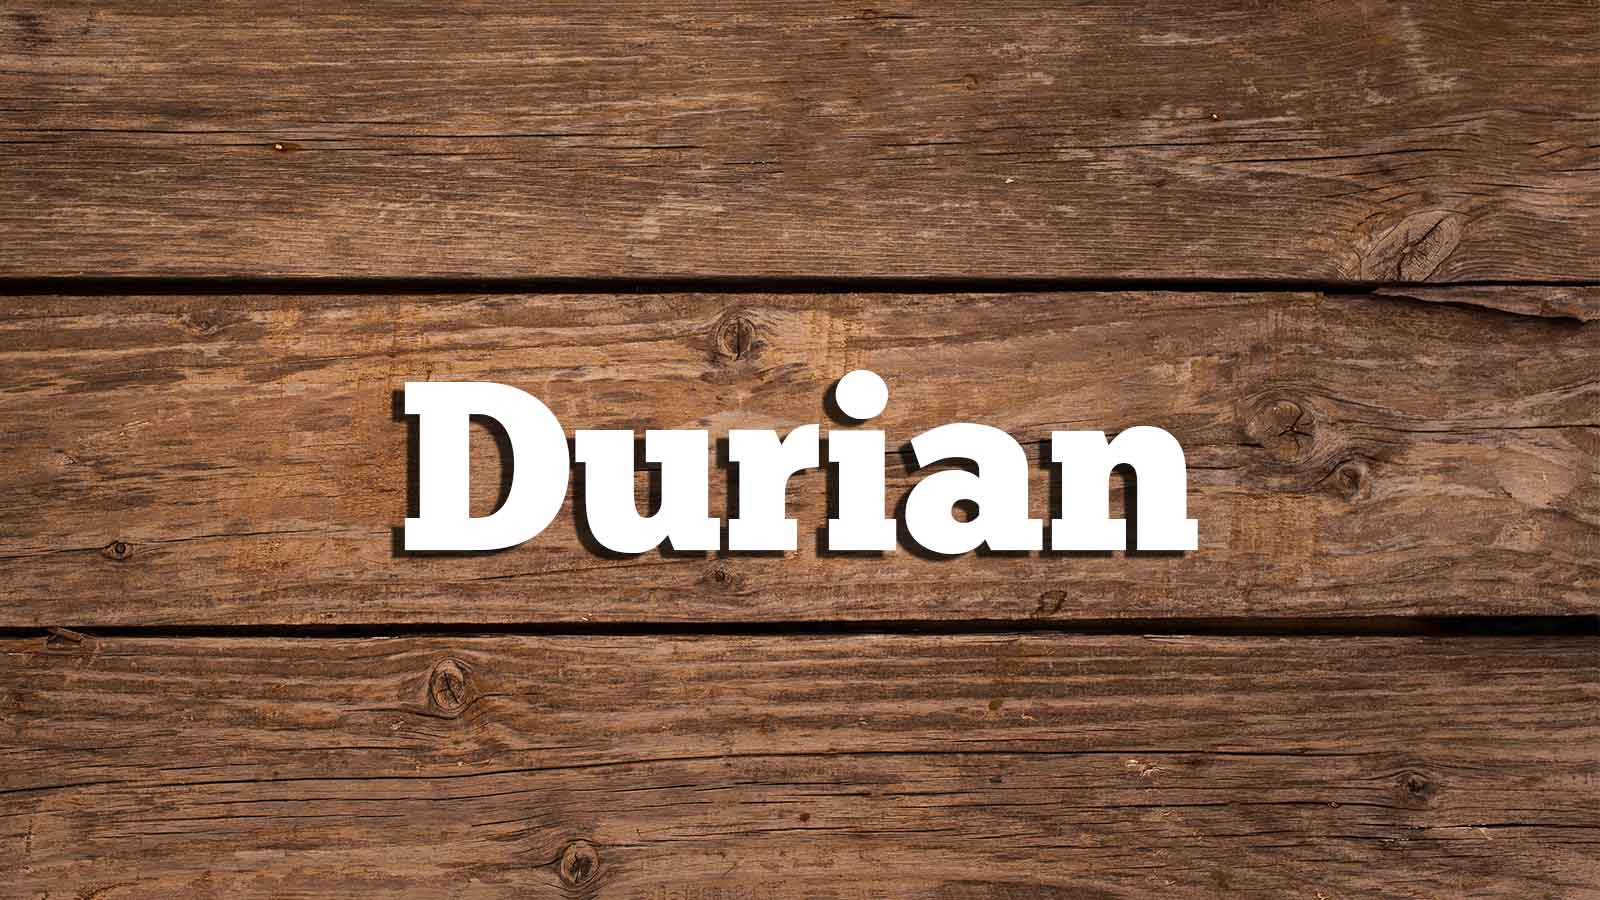 🍒 Most People Can’t Identify All of These Fruits — Can You? Text Durian